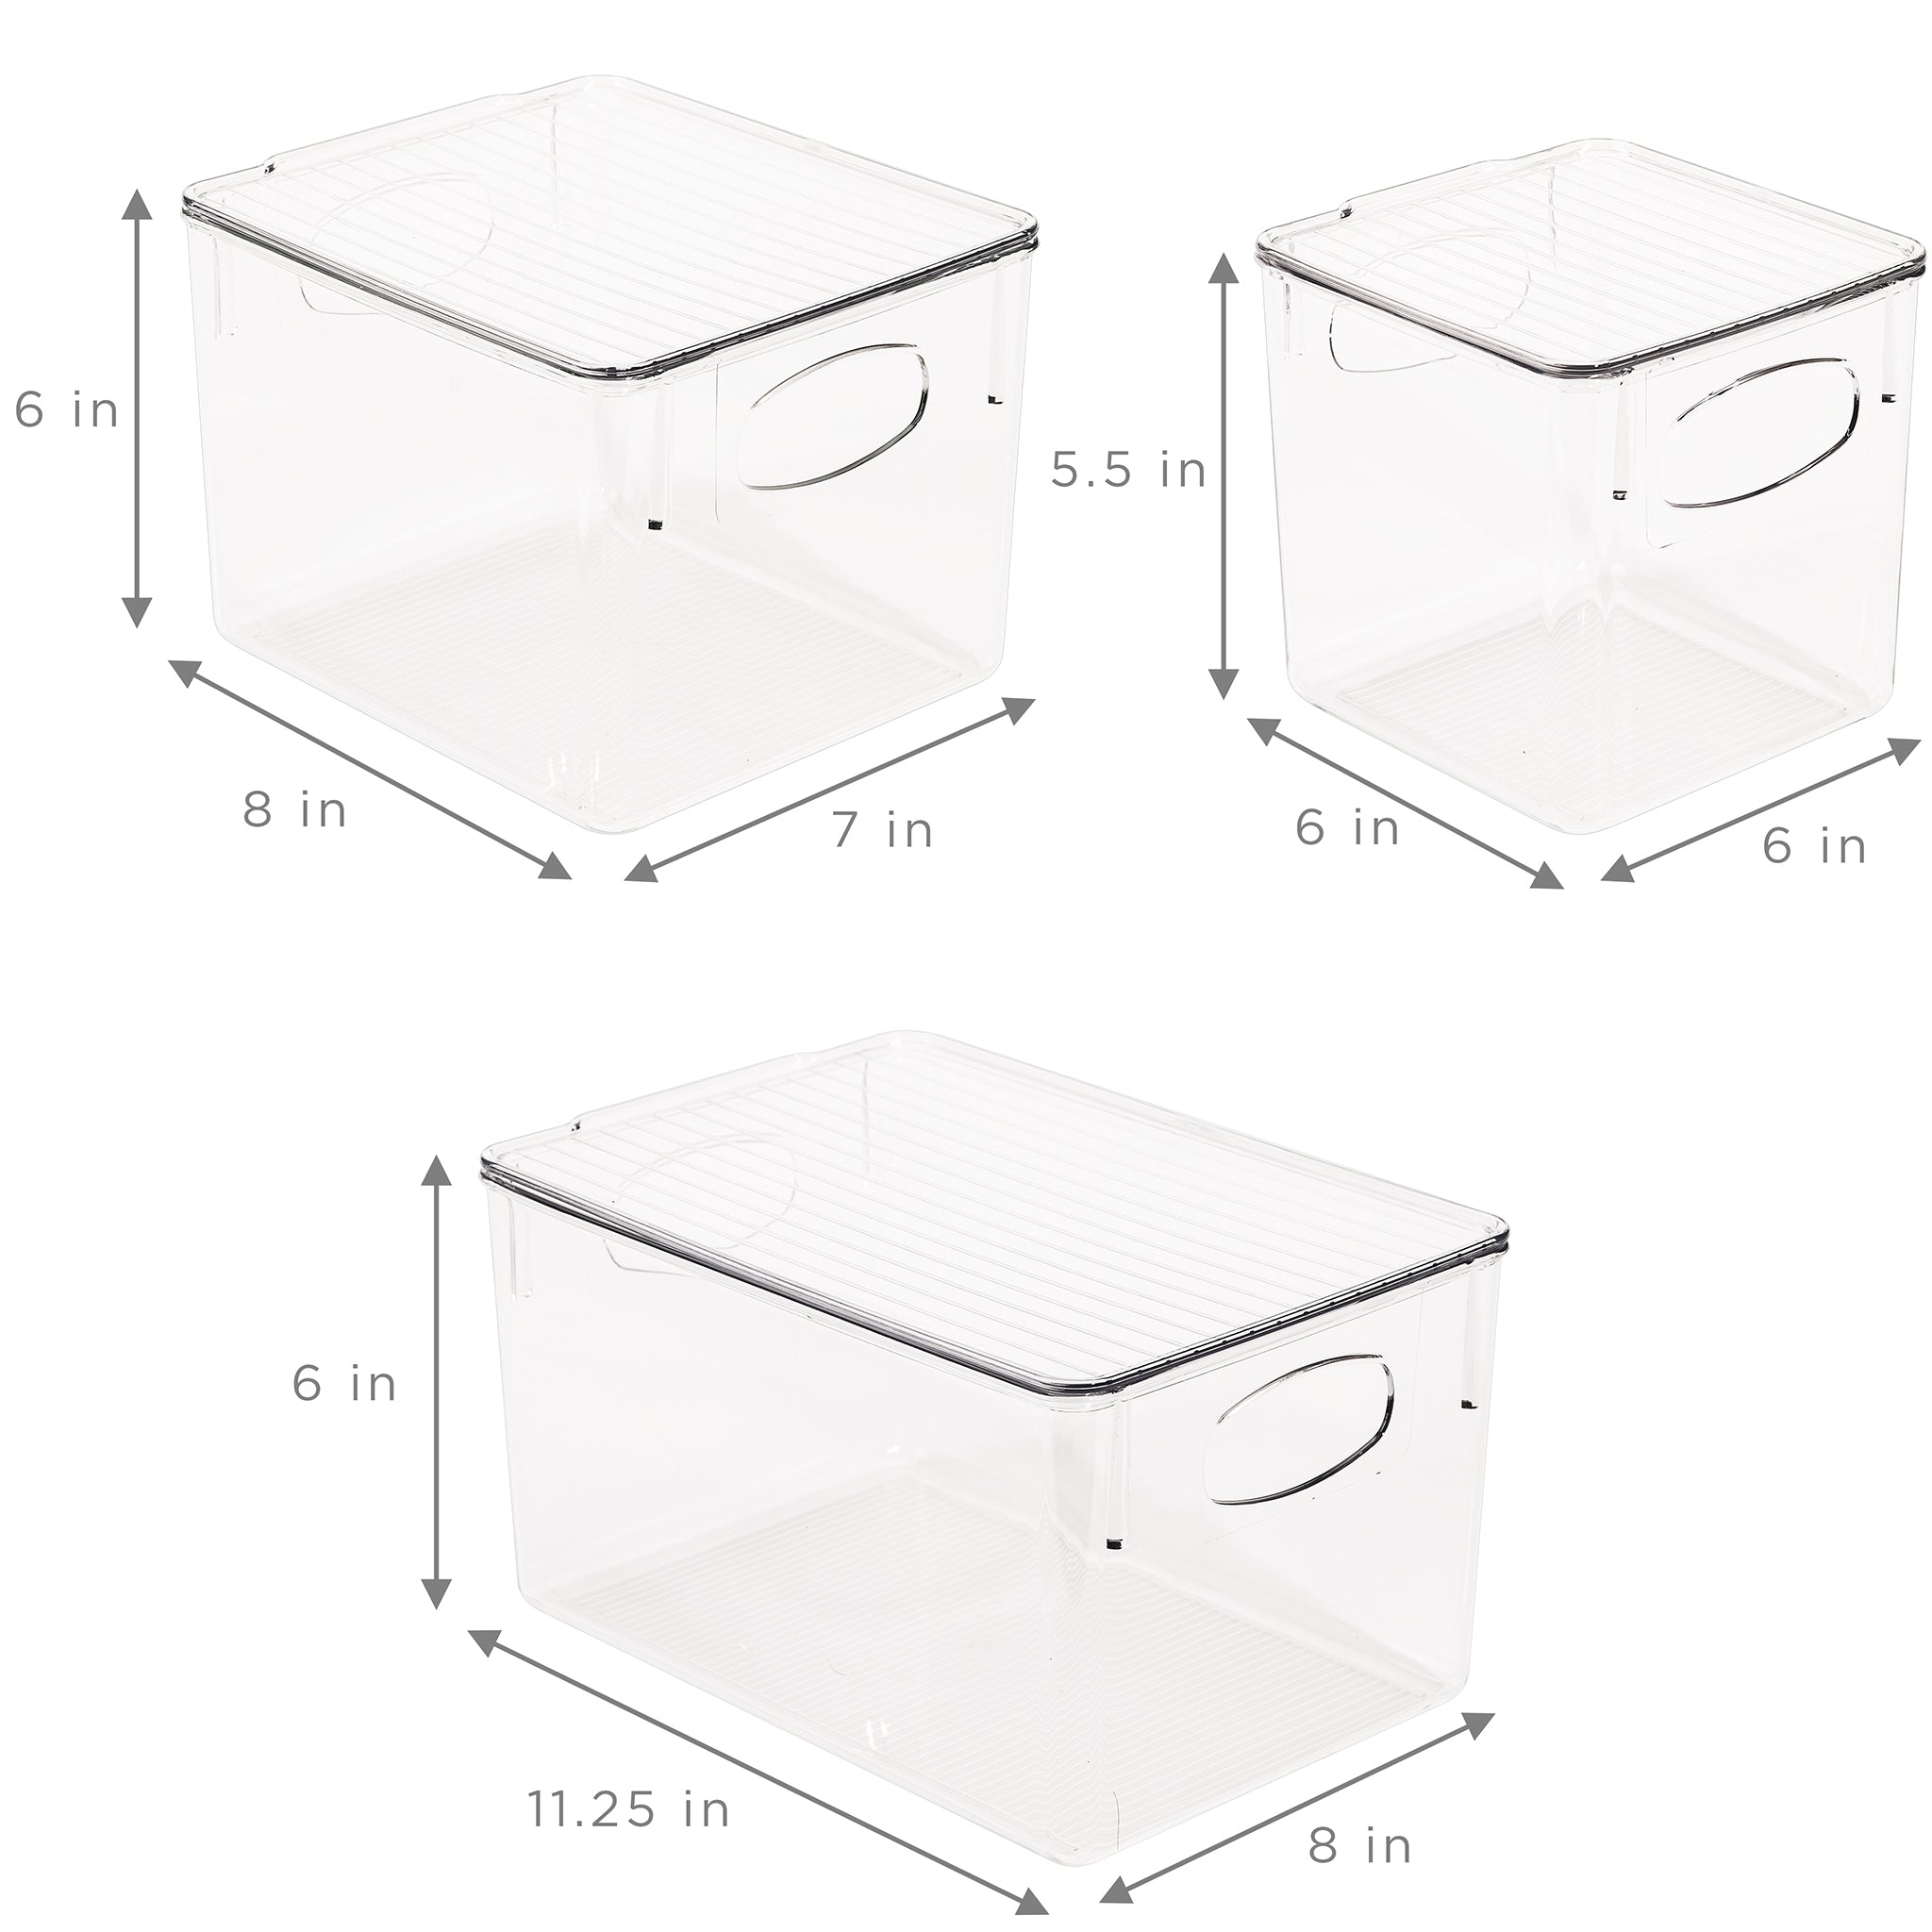 Clear Plastic Storage Bins with Handles (Large)